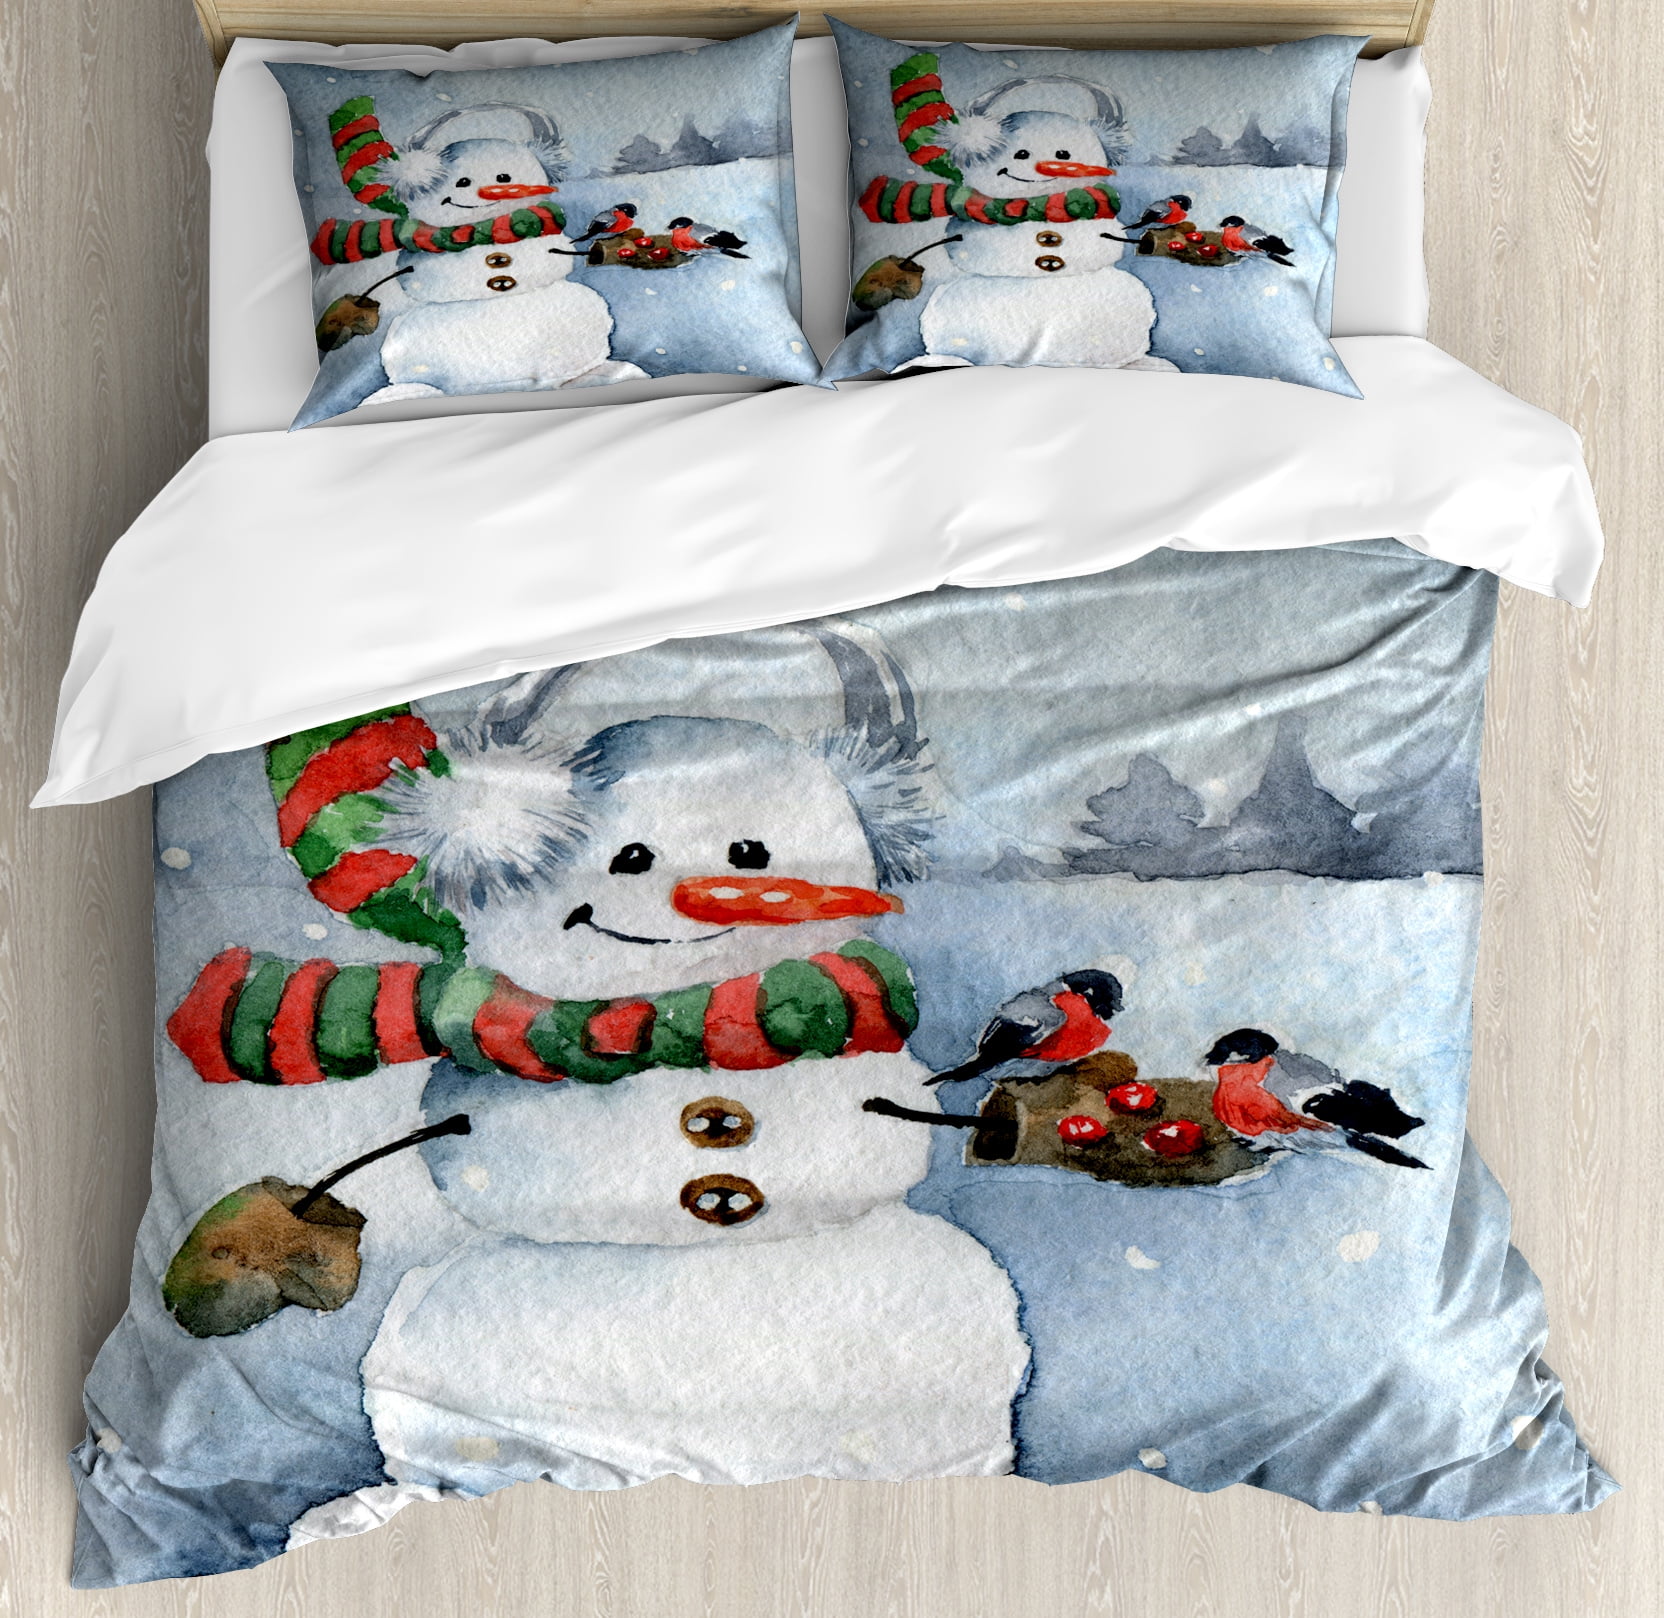 Snowman Duvet Cover Set Watercolor Style Snowfall Outdoors Merry